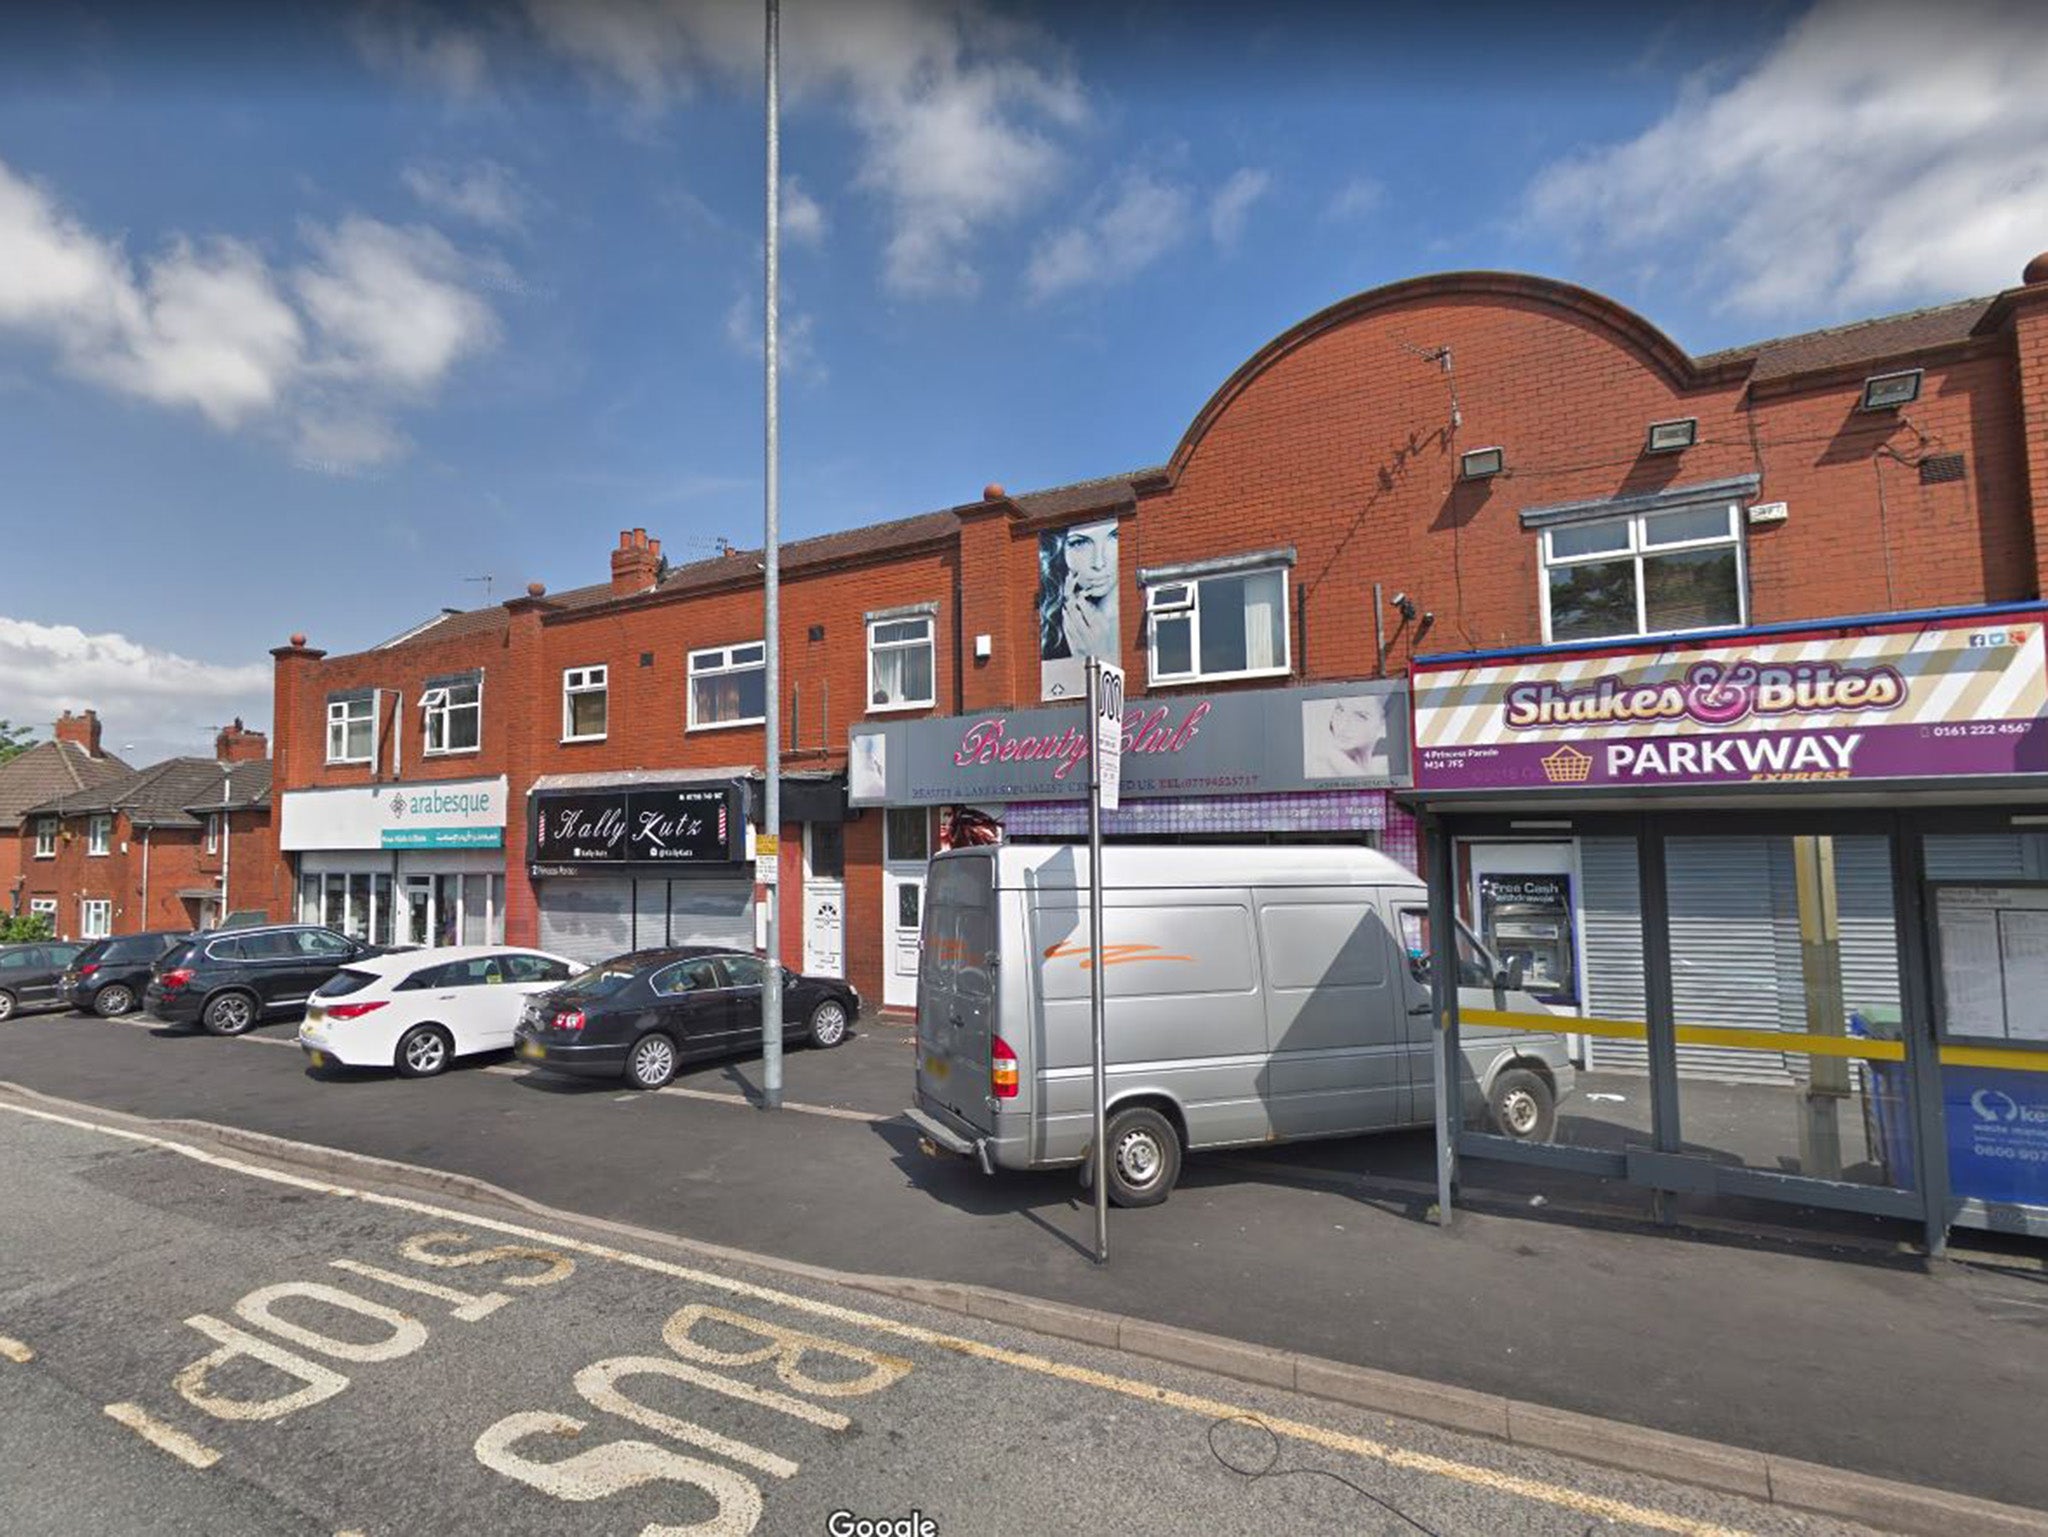 Armed robbers burst into the café on Princess Road in the Moss Side area of Manchester